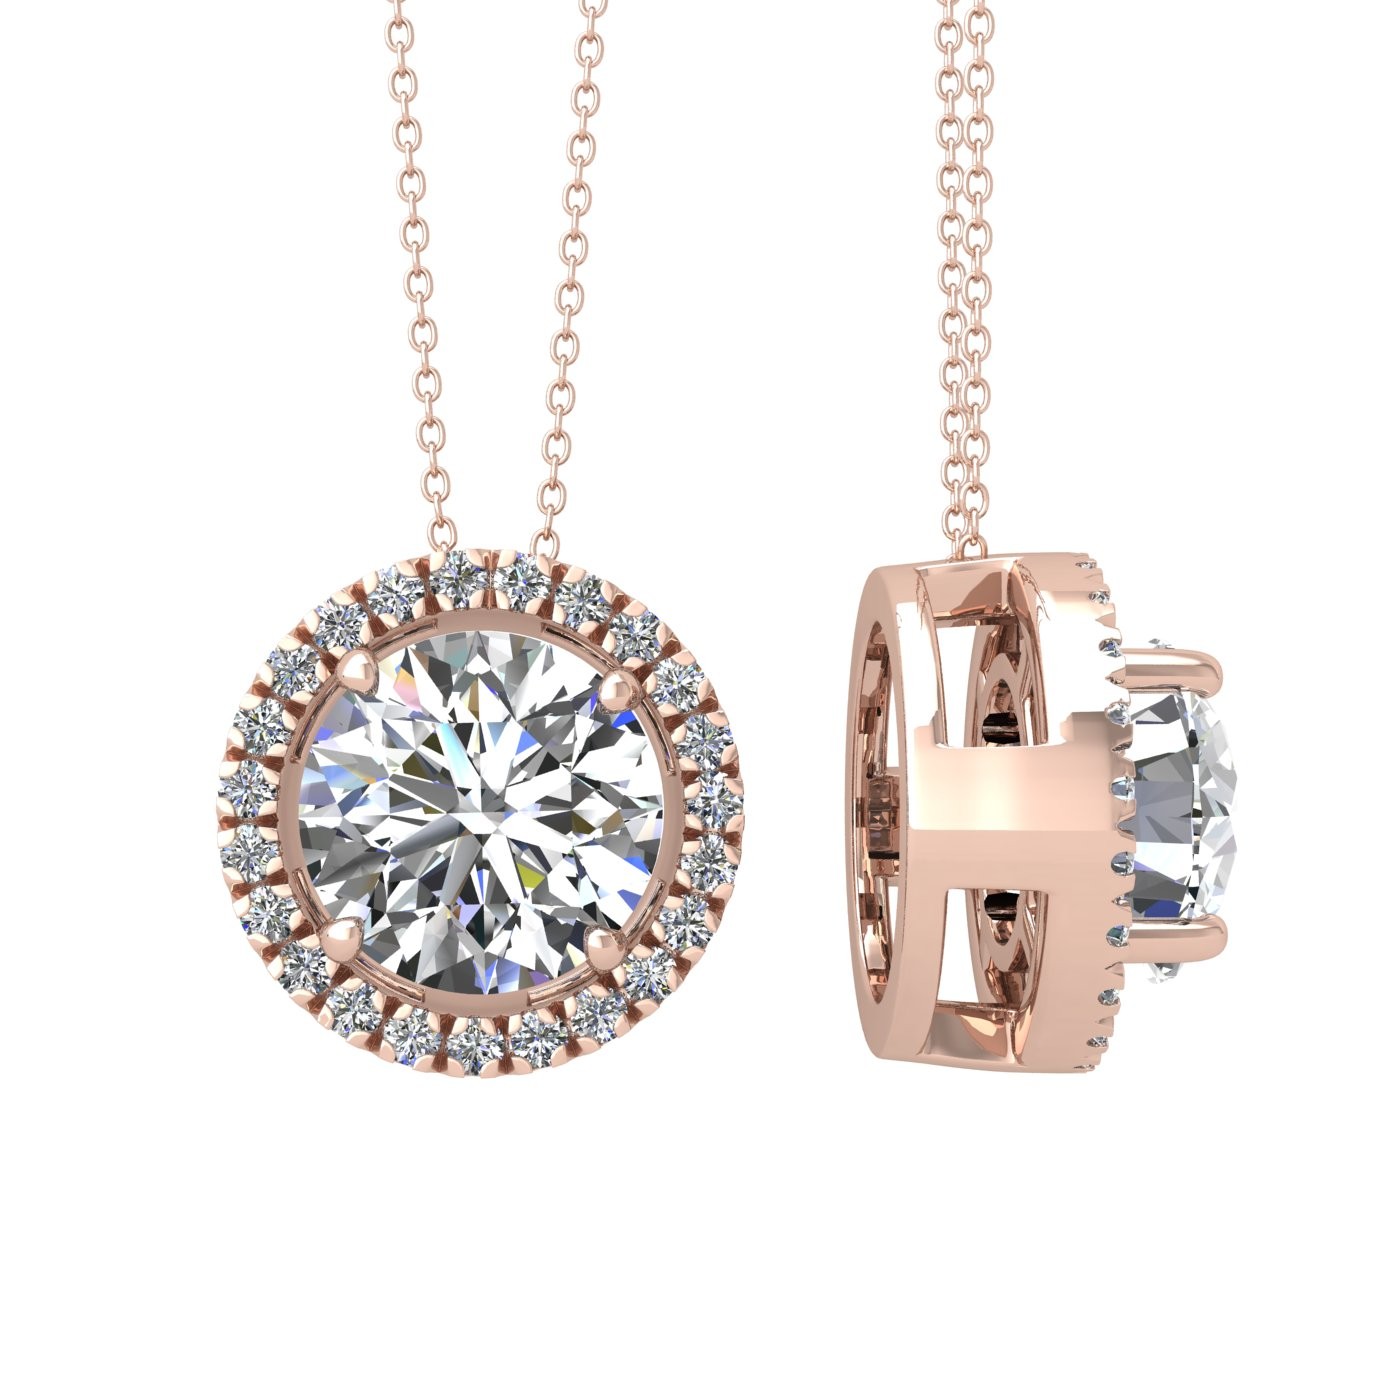 18k rose gold 1 ct 4 prong round shape diamond pendant with diamond pavÉ set halo including chain seperate from the pendant Photos & images